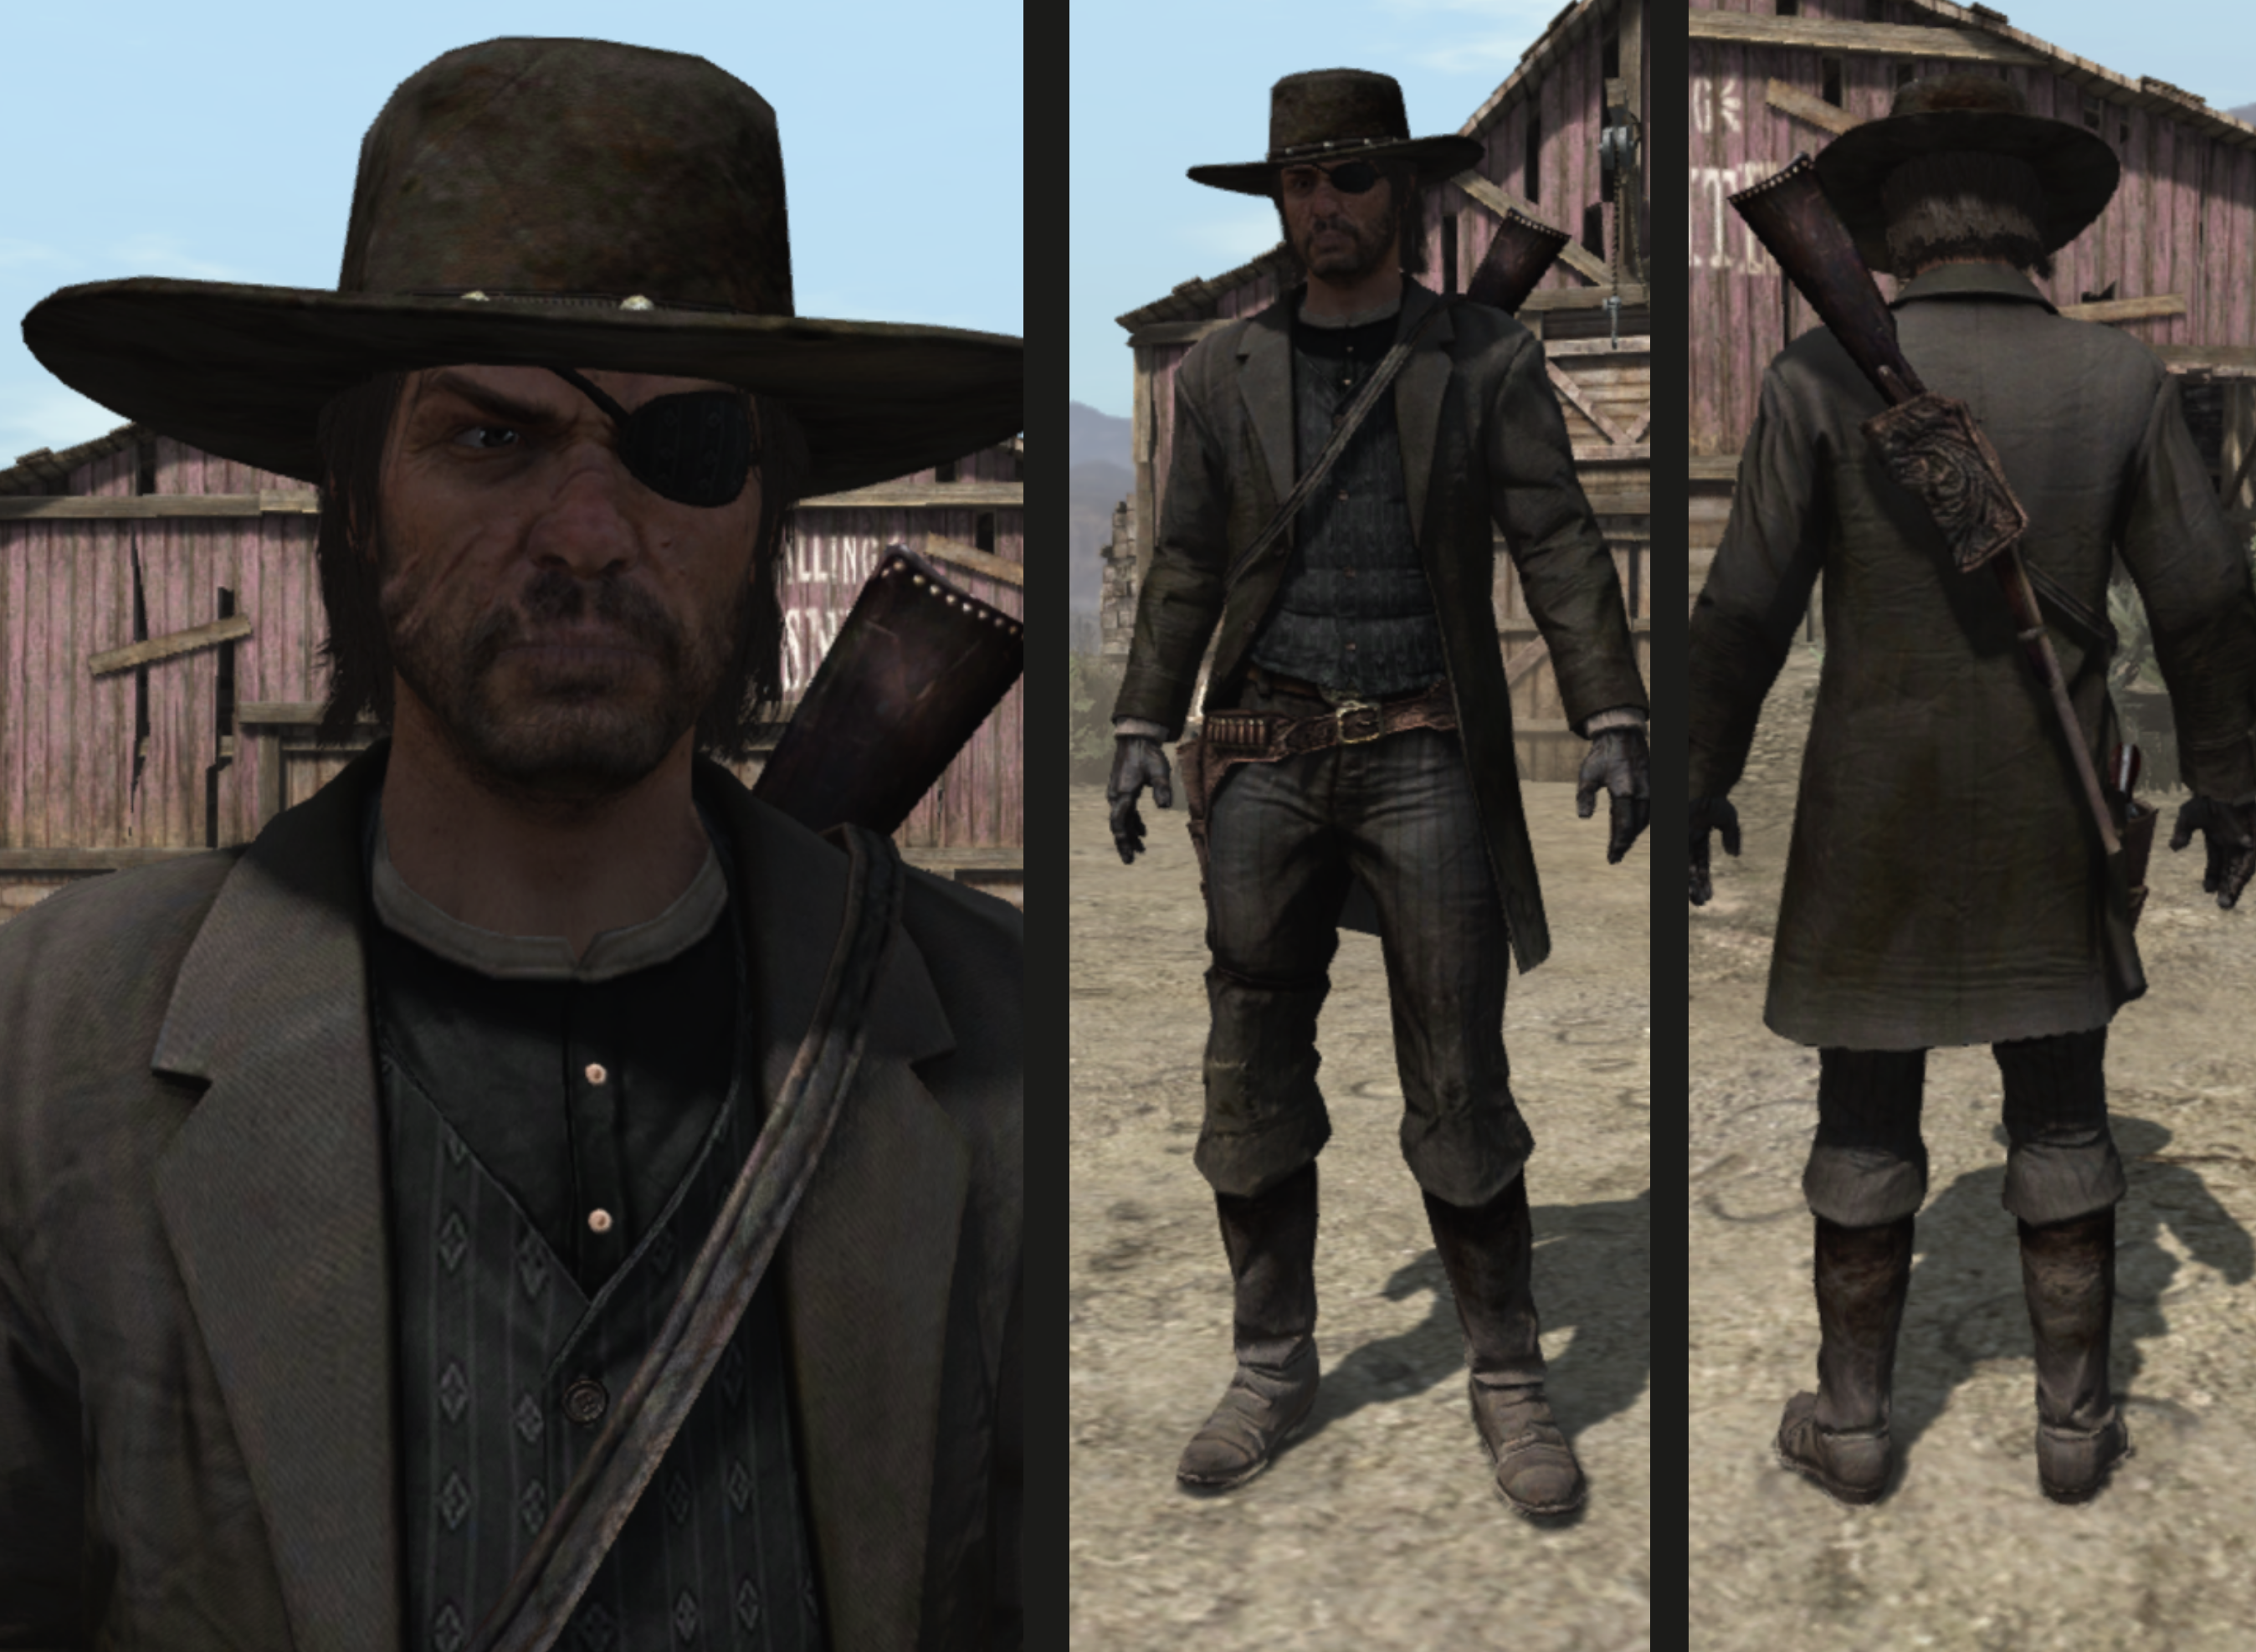 Deadly Assassin Outfit, Red Dead Wiki